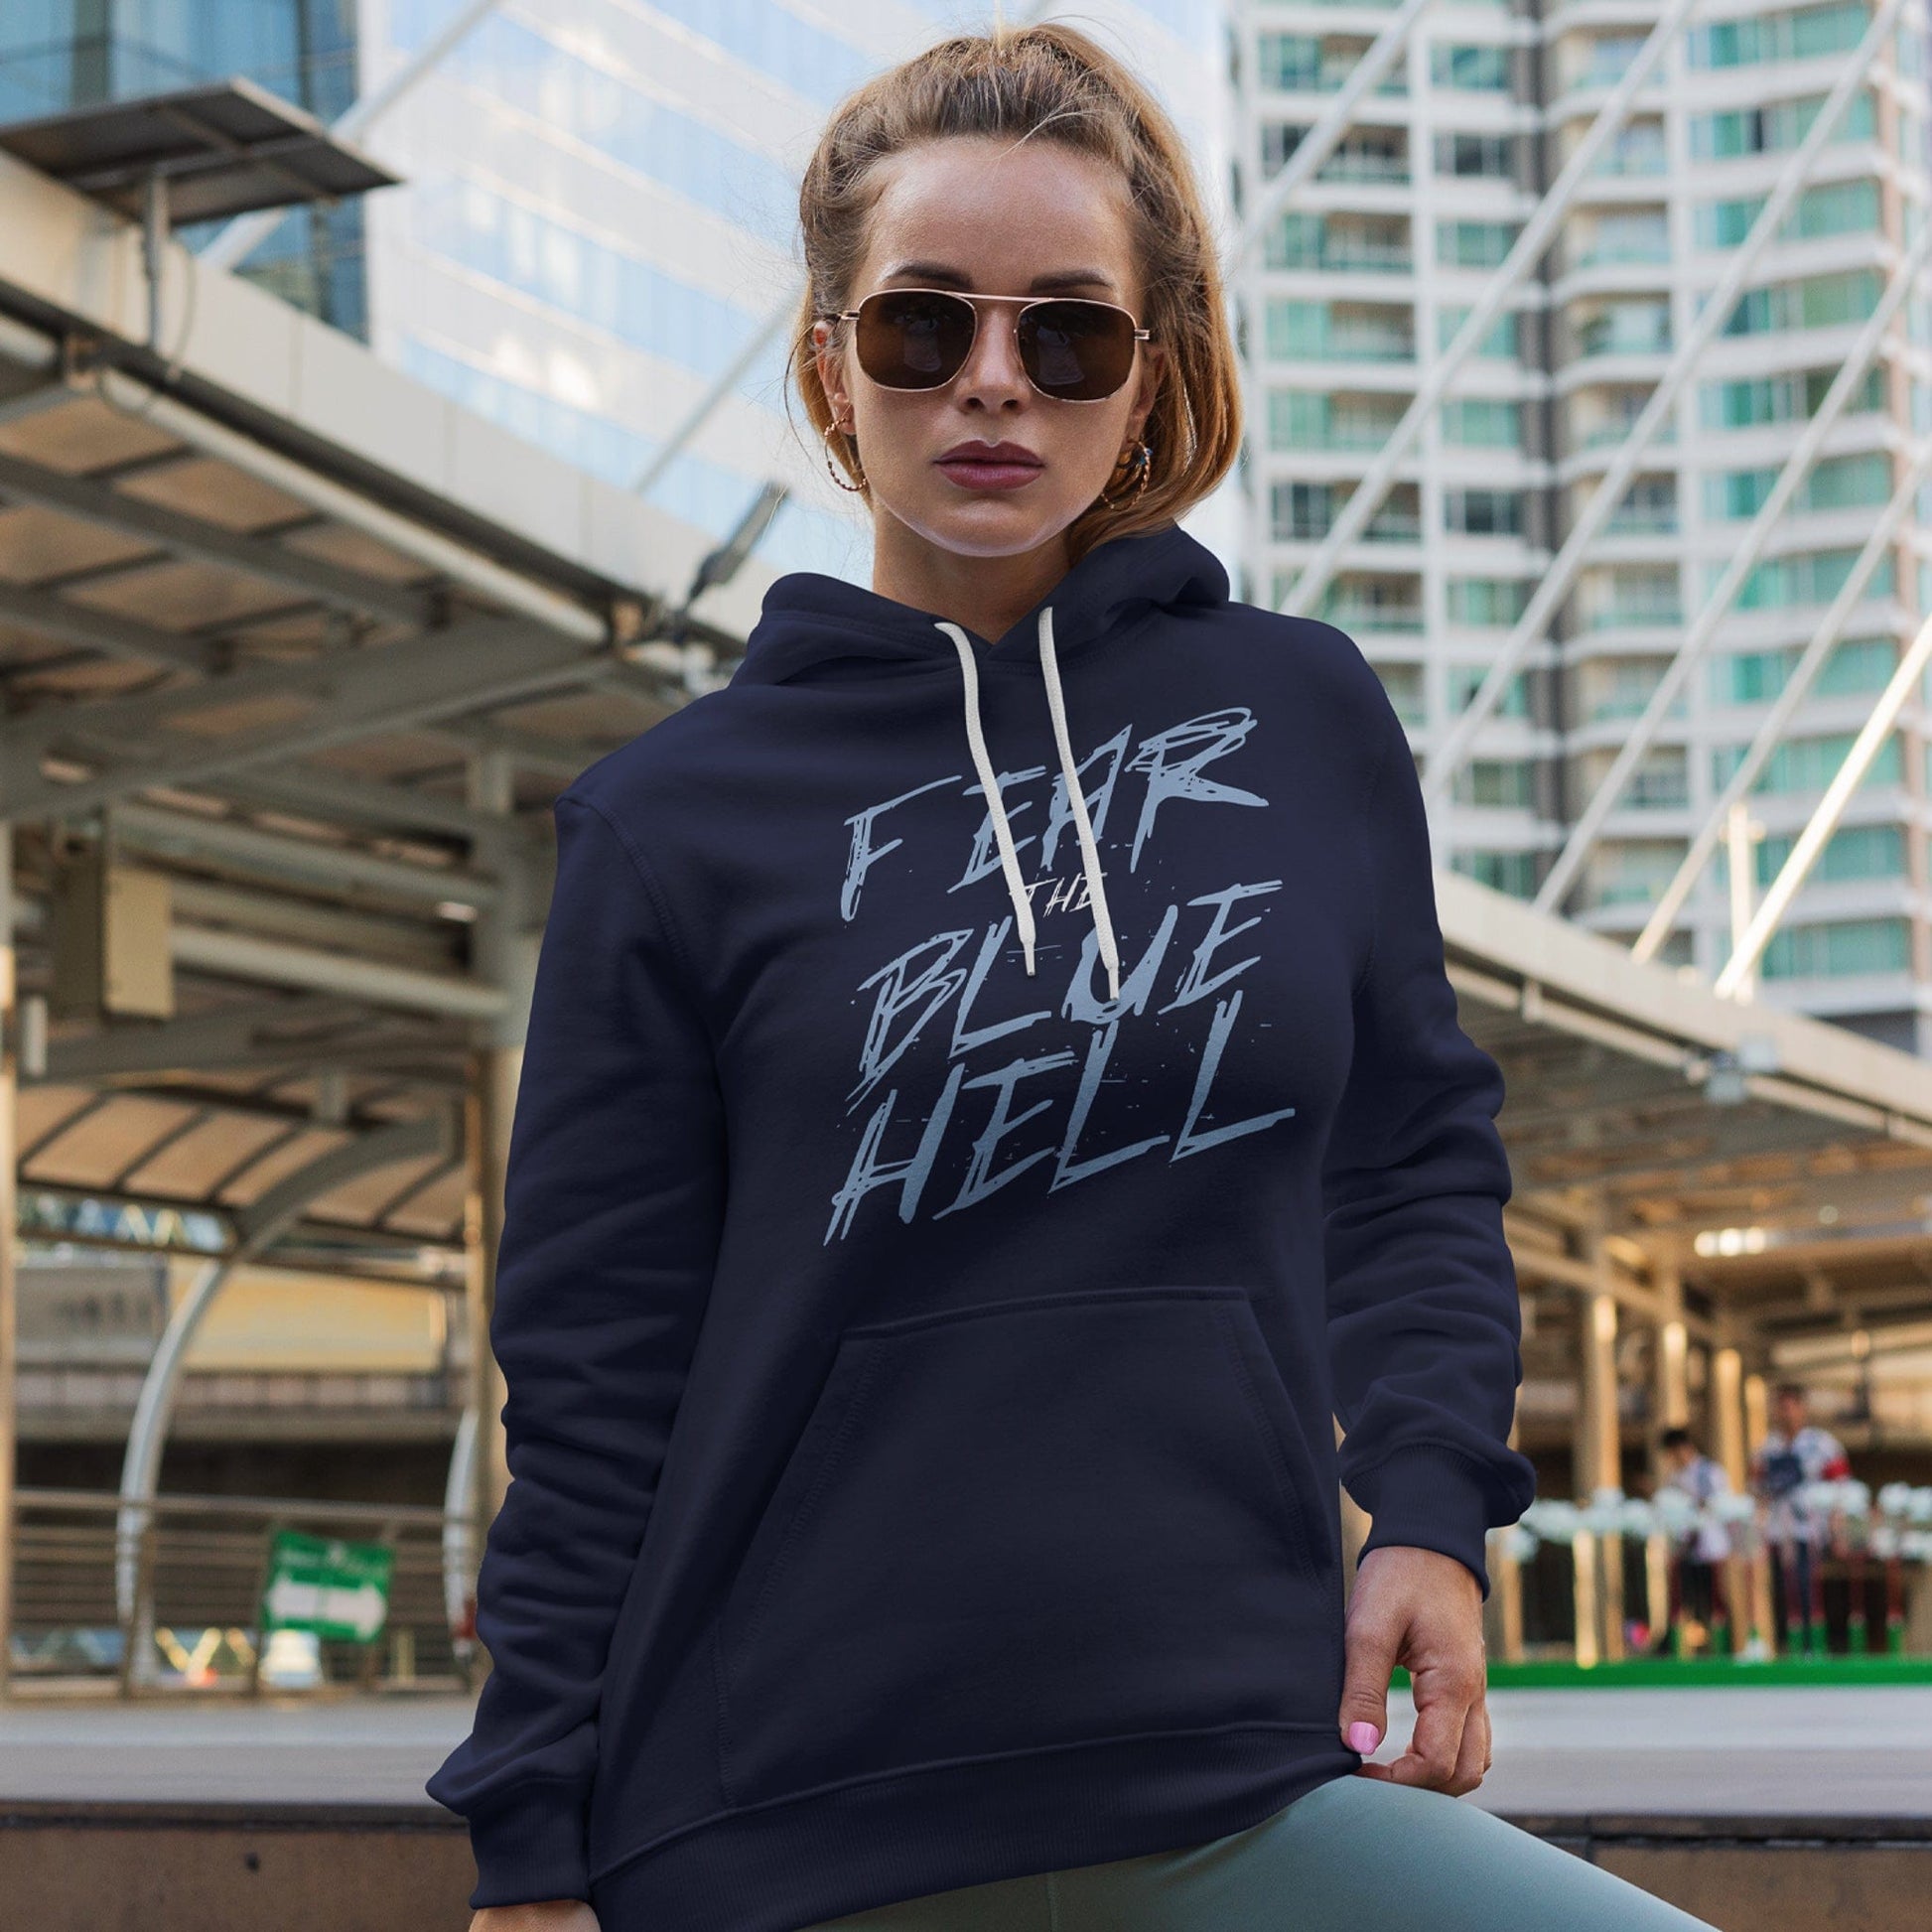 KC Swag Sporting Kansas City powder blue/white FEAR THE BLUE HELL on navy fleece pull-over hoodie worn by female model in front of downtown transportation facility